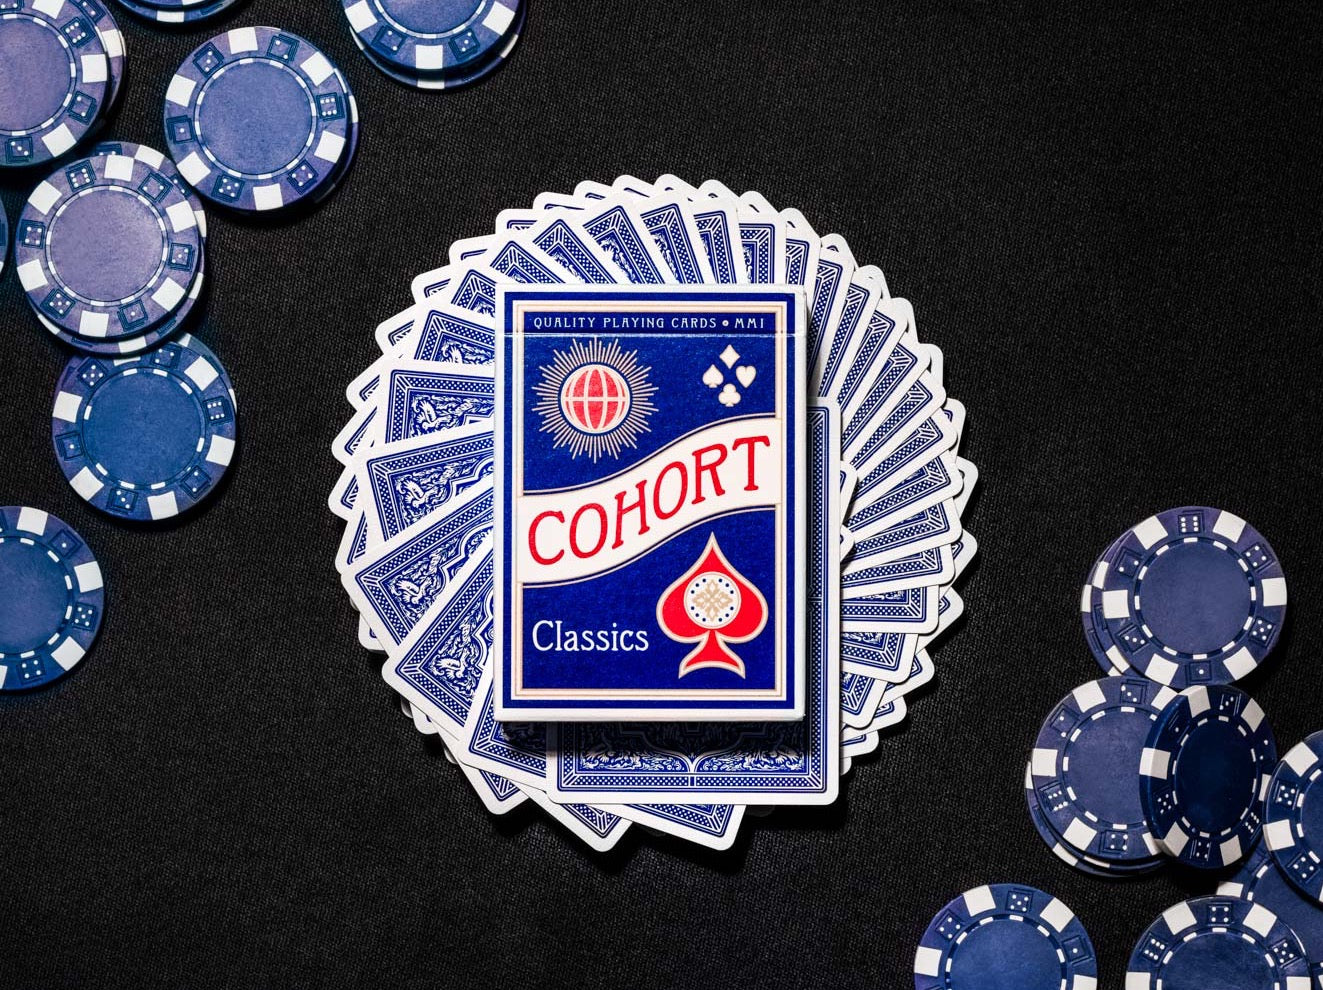 Blue Cohorts by Luxury-pressed E7 | Ellusionist